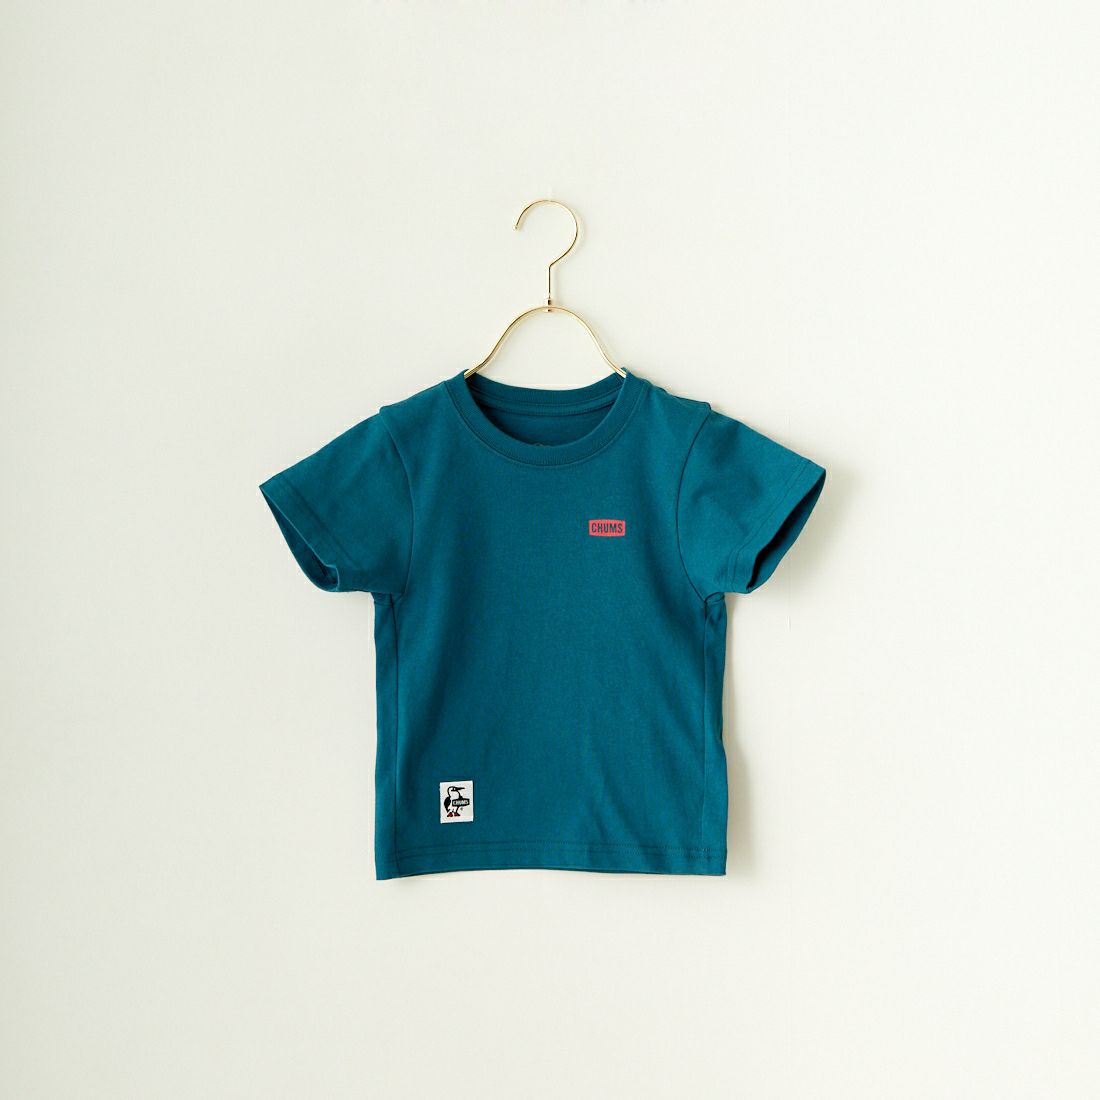 CHUMS [チャムス] キッズ ブービーロゴTシャツ [CH21-1282] T001 TEAL